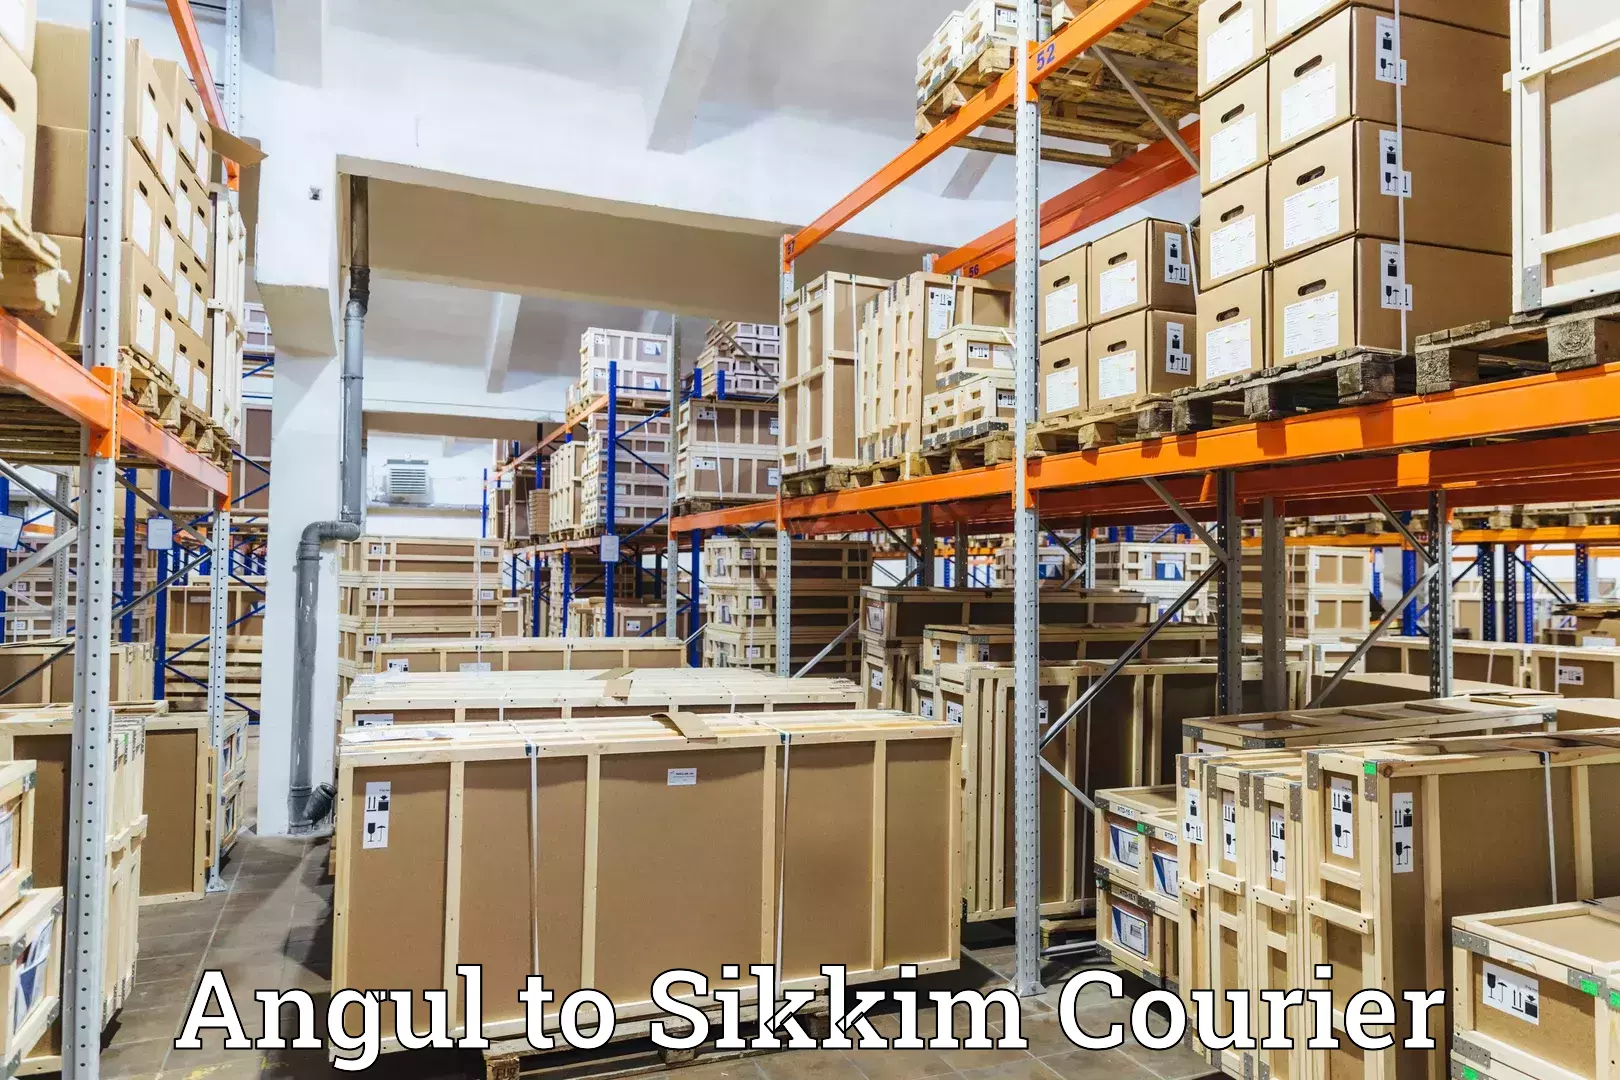 Local delivery service Angul to Sikkim